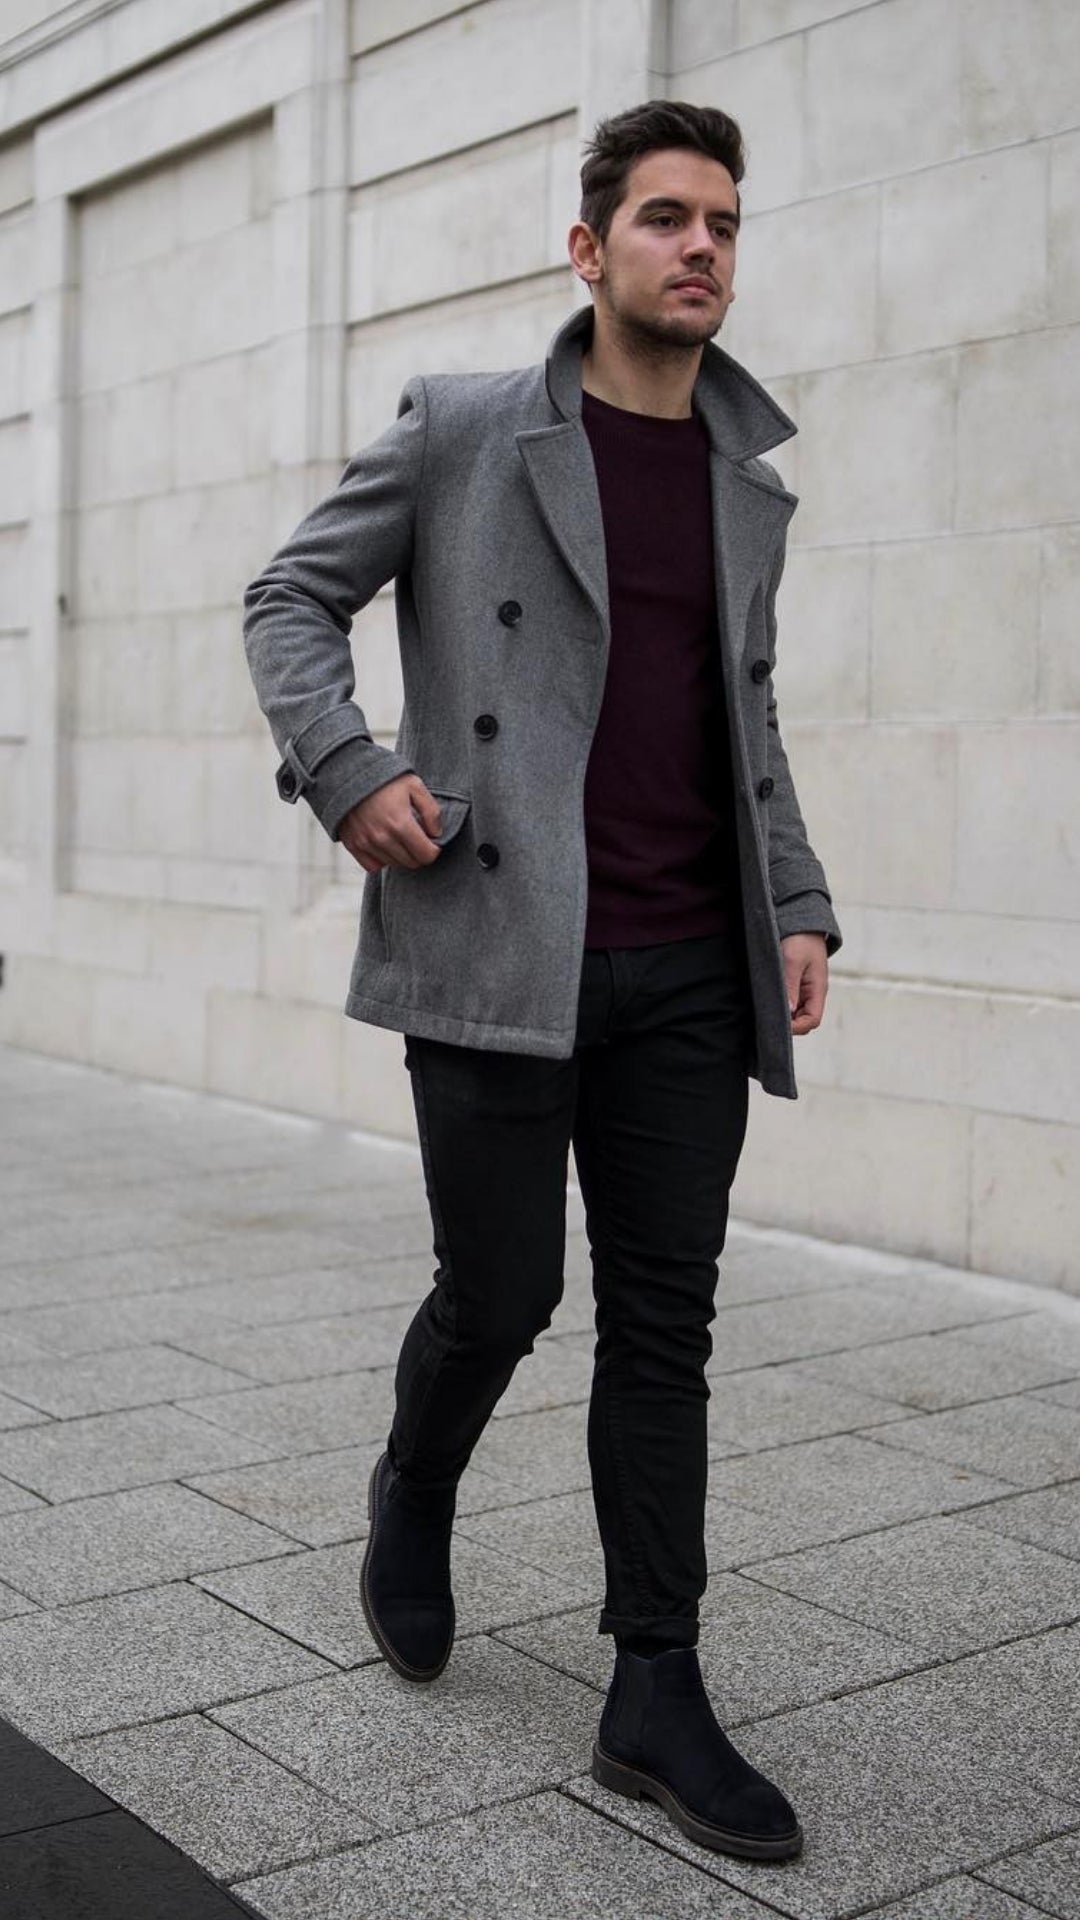 Monochrome Dressing Style For Men - 5 Outfits To Try #monochrome #outfits #mensfashion #streetstyle